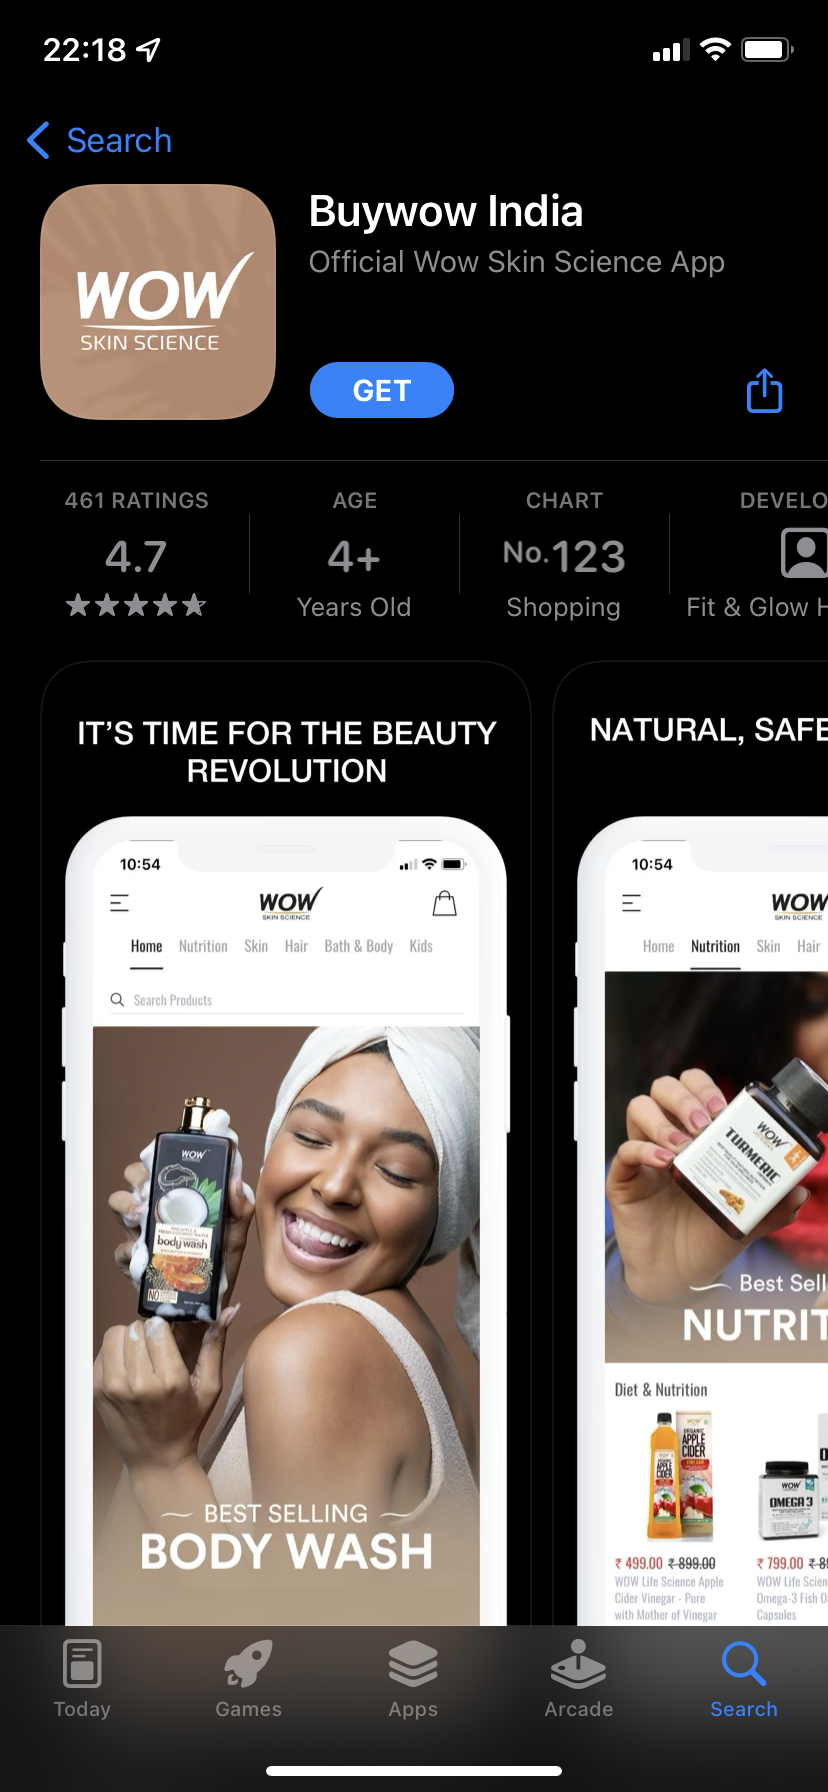 wow skincare - beauty and cosmetics mobile commerce